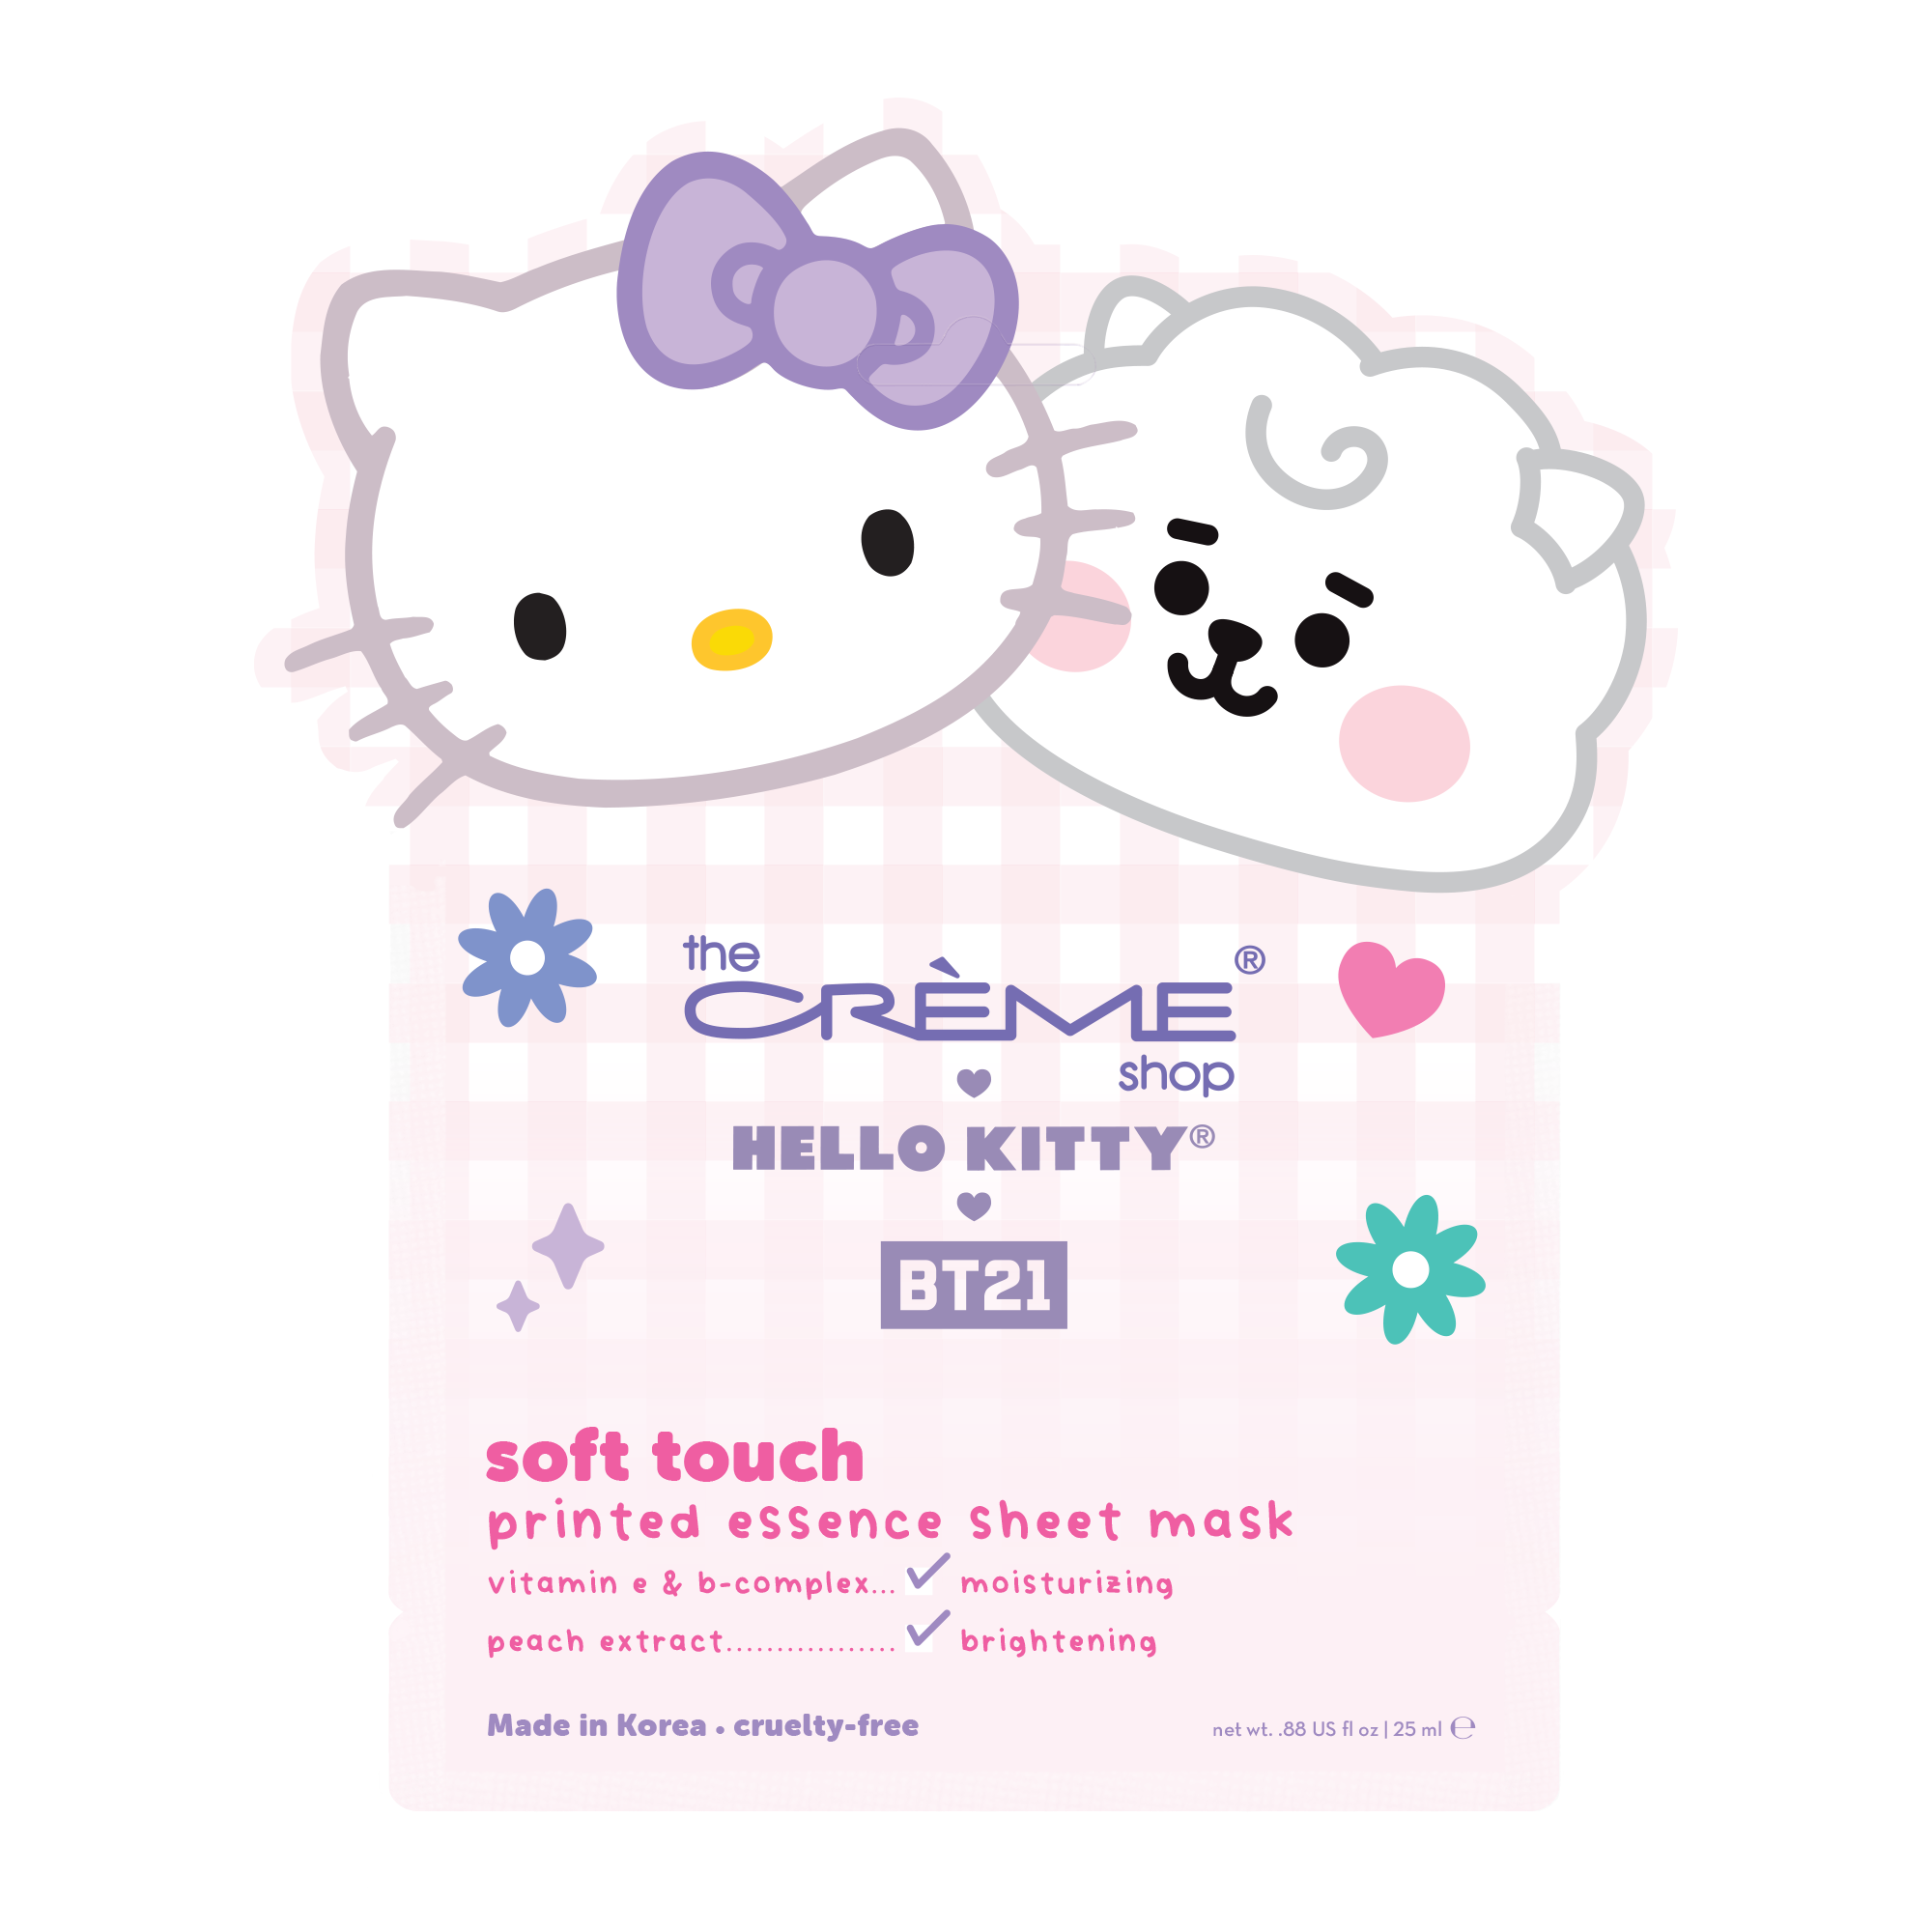 Hello Kitty & BT21 Soft Touch Printed Essence Sheet Mask Beauty The Crème Shop   